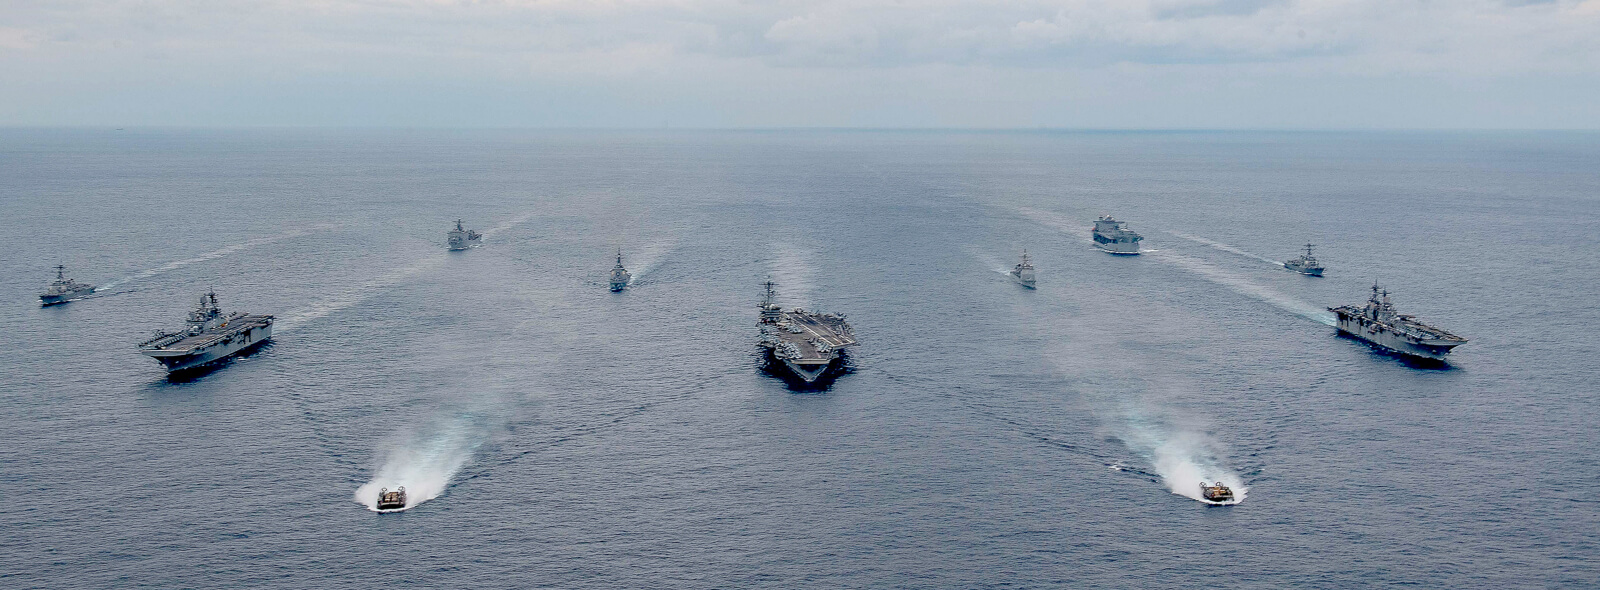 Ships of the America and Essex Amphibious Ready Groups, and Carrier Strike Group (CSG) 3, sail in formation in the Philippine Sea